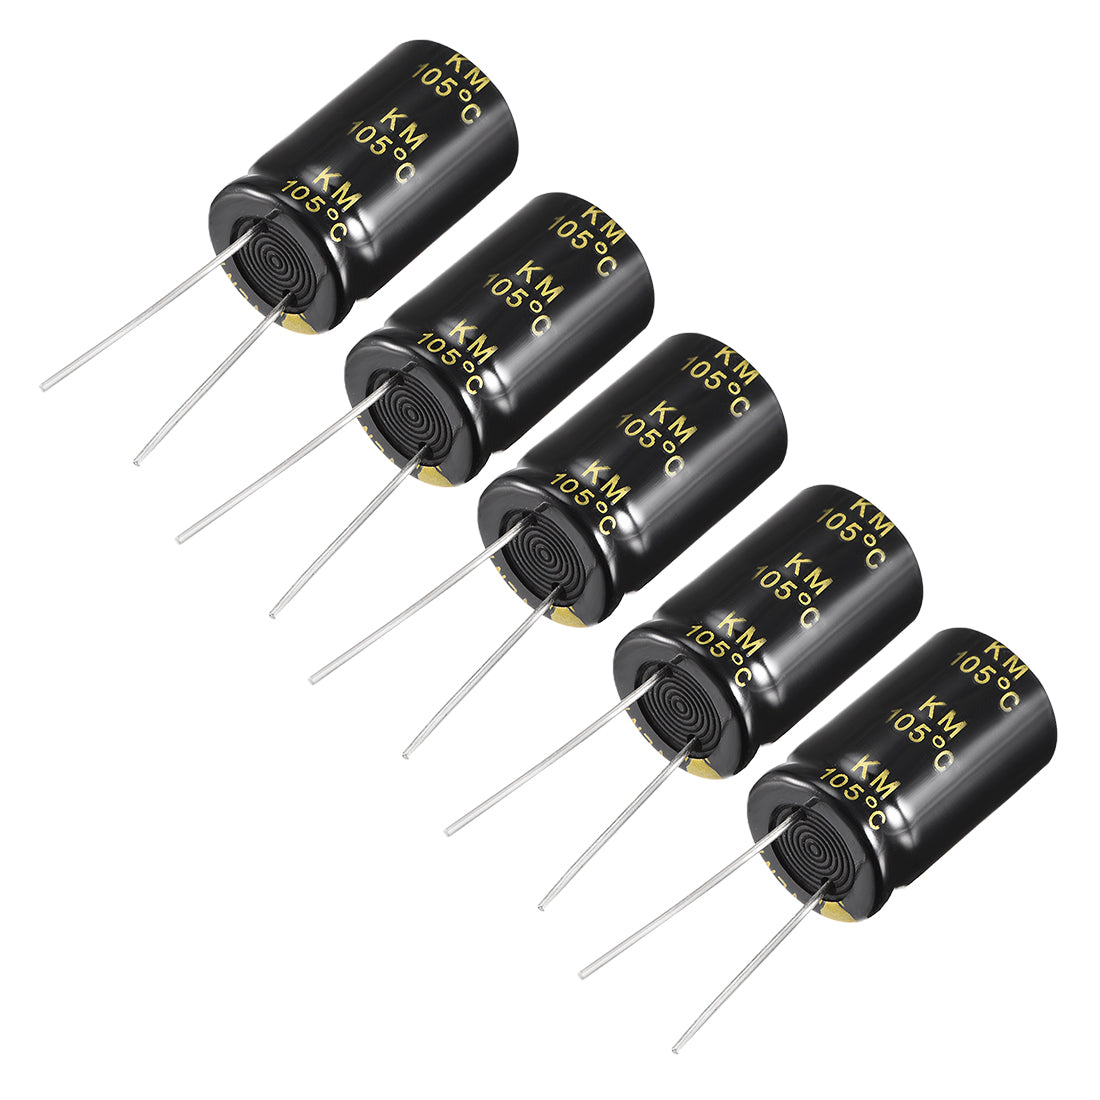 uxcell Uxcell Aluminum Radial Electrolytic Capacitor with 4700uF 25V 105 Celsius Life 2000H 16 x 26 mm Black 5pcs